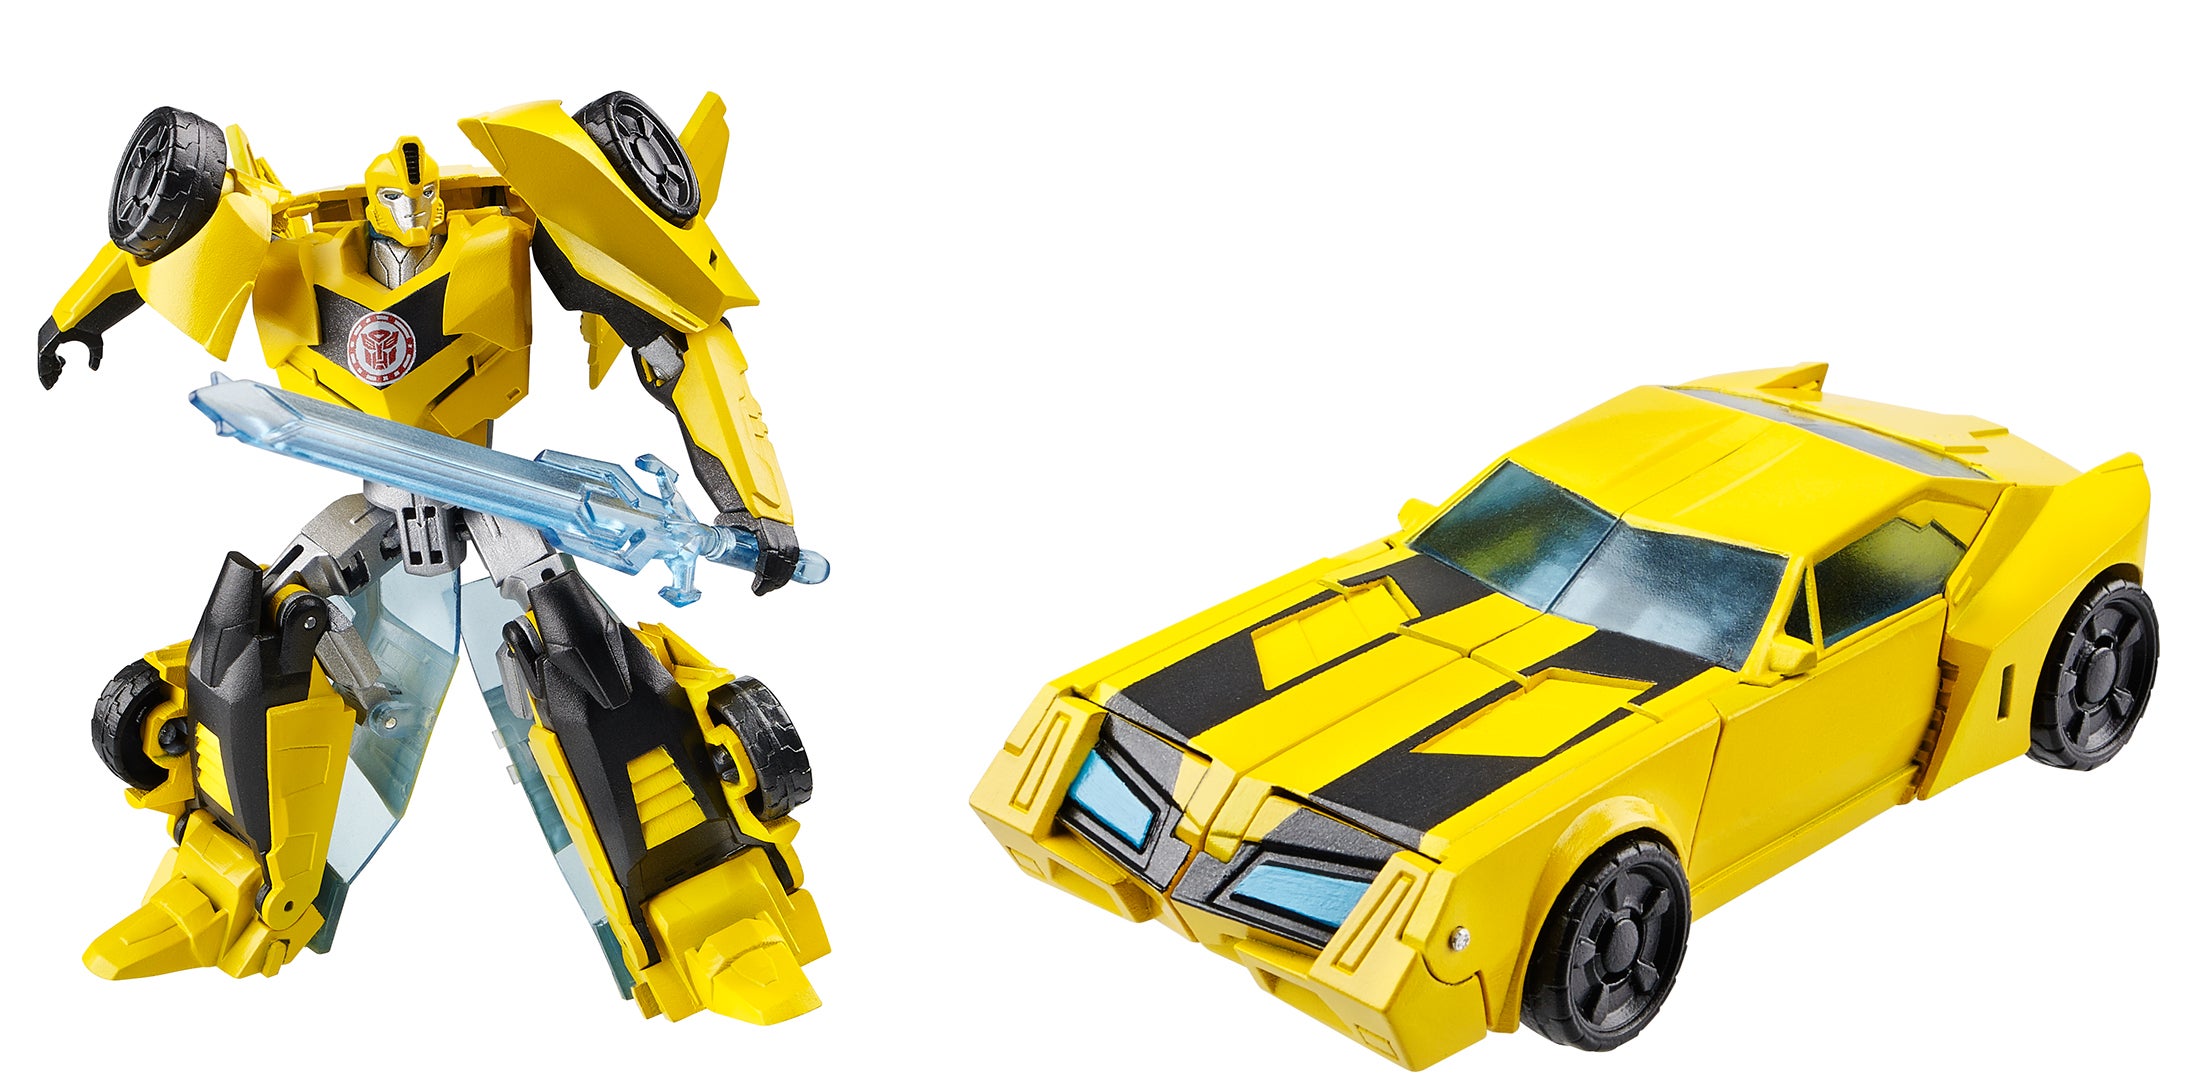 Next Year's Transformers Combine To Form Awesome